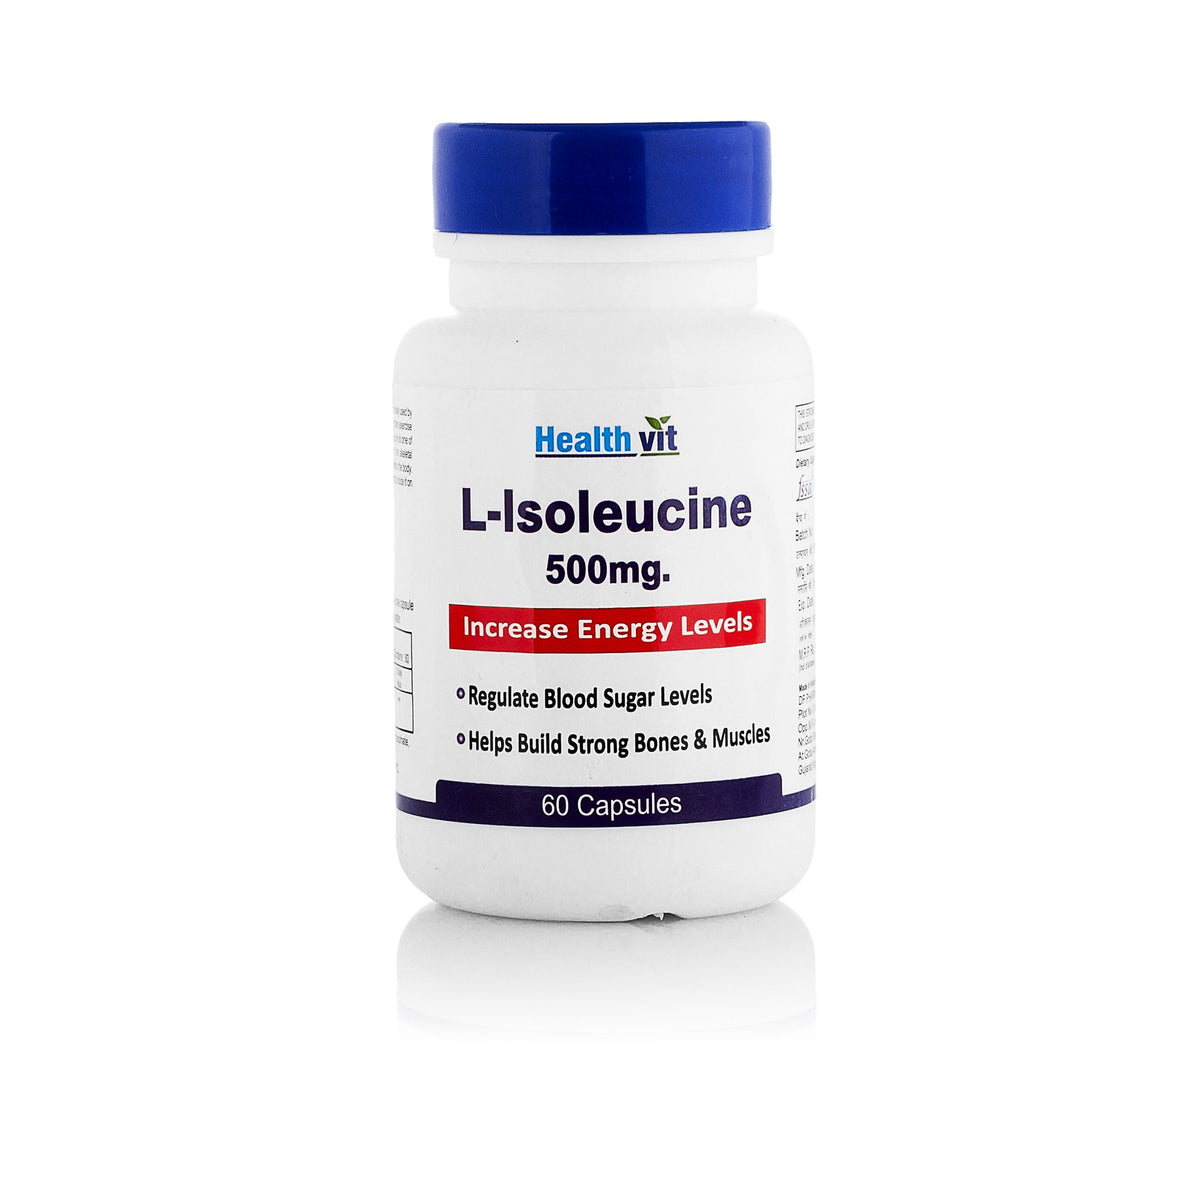 Healthvit L-Isoleucine 500mg For Increase Energy Levels | Regulates Blood Sugar Levels | Helps Build Muscle | For Healthy Bone | Vegan And Gluten Free | 60 Capsules